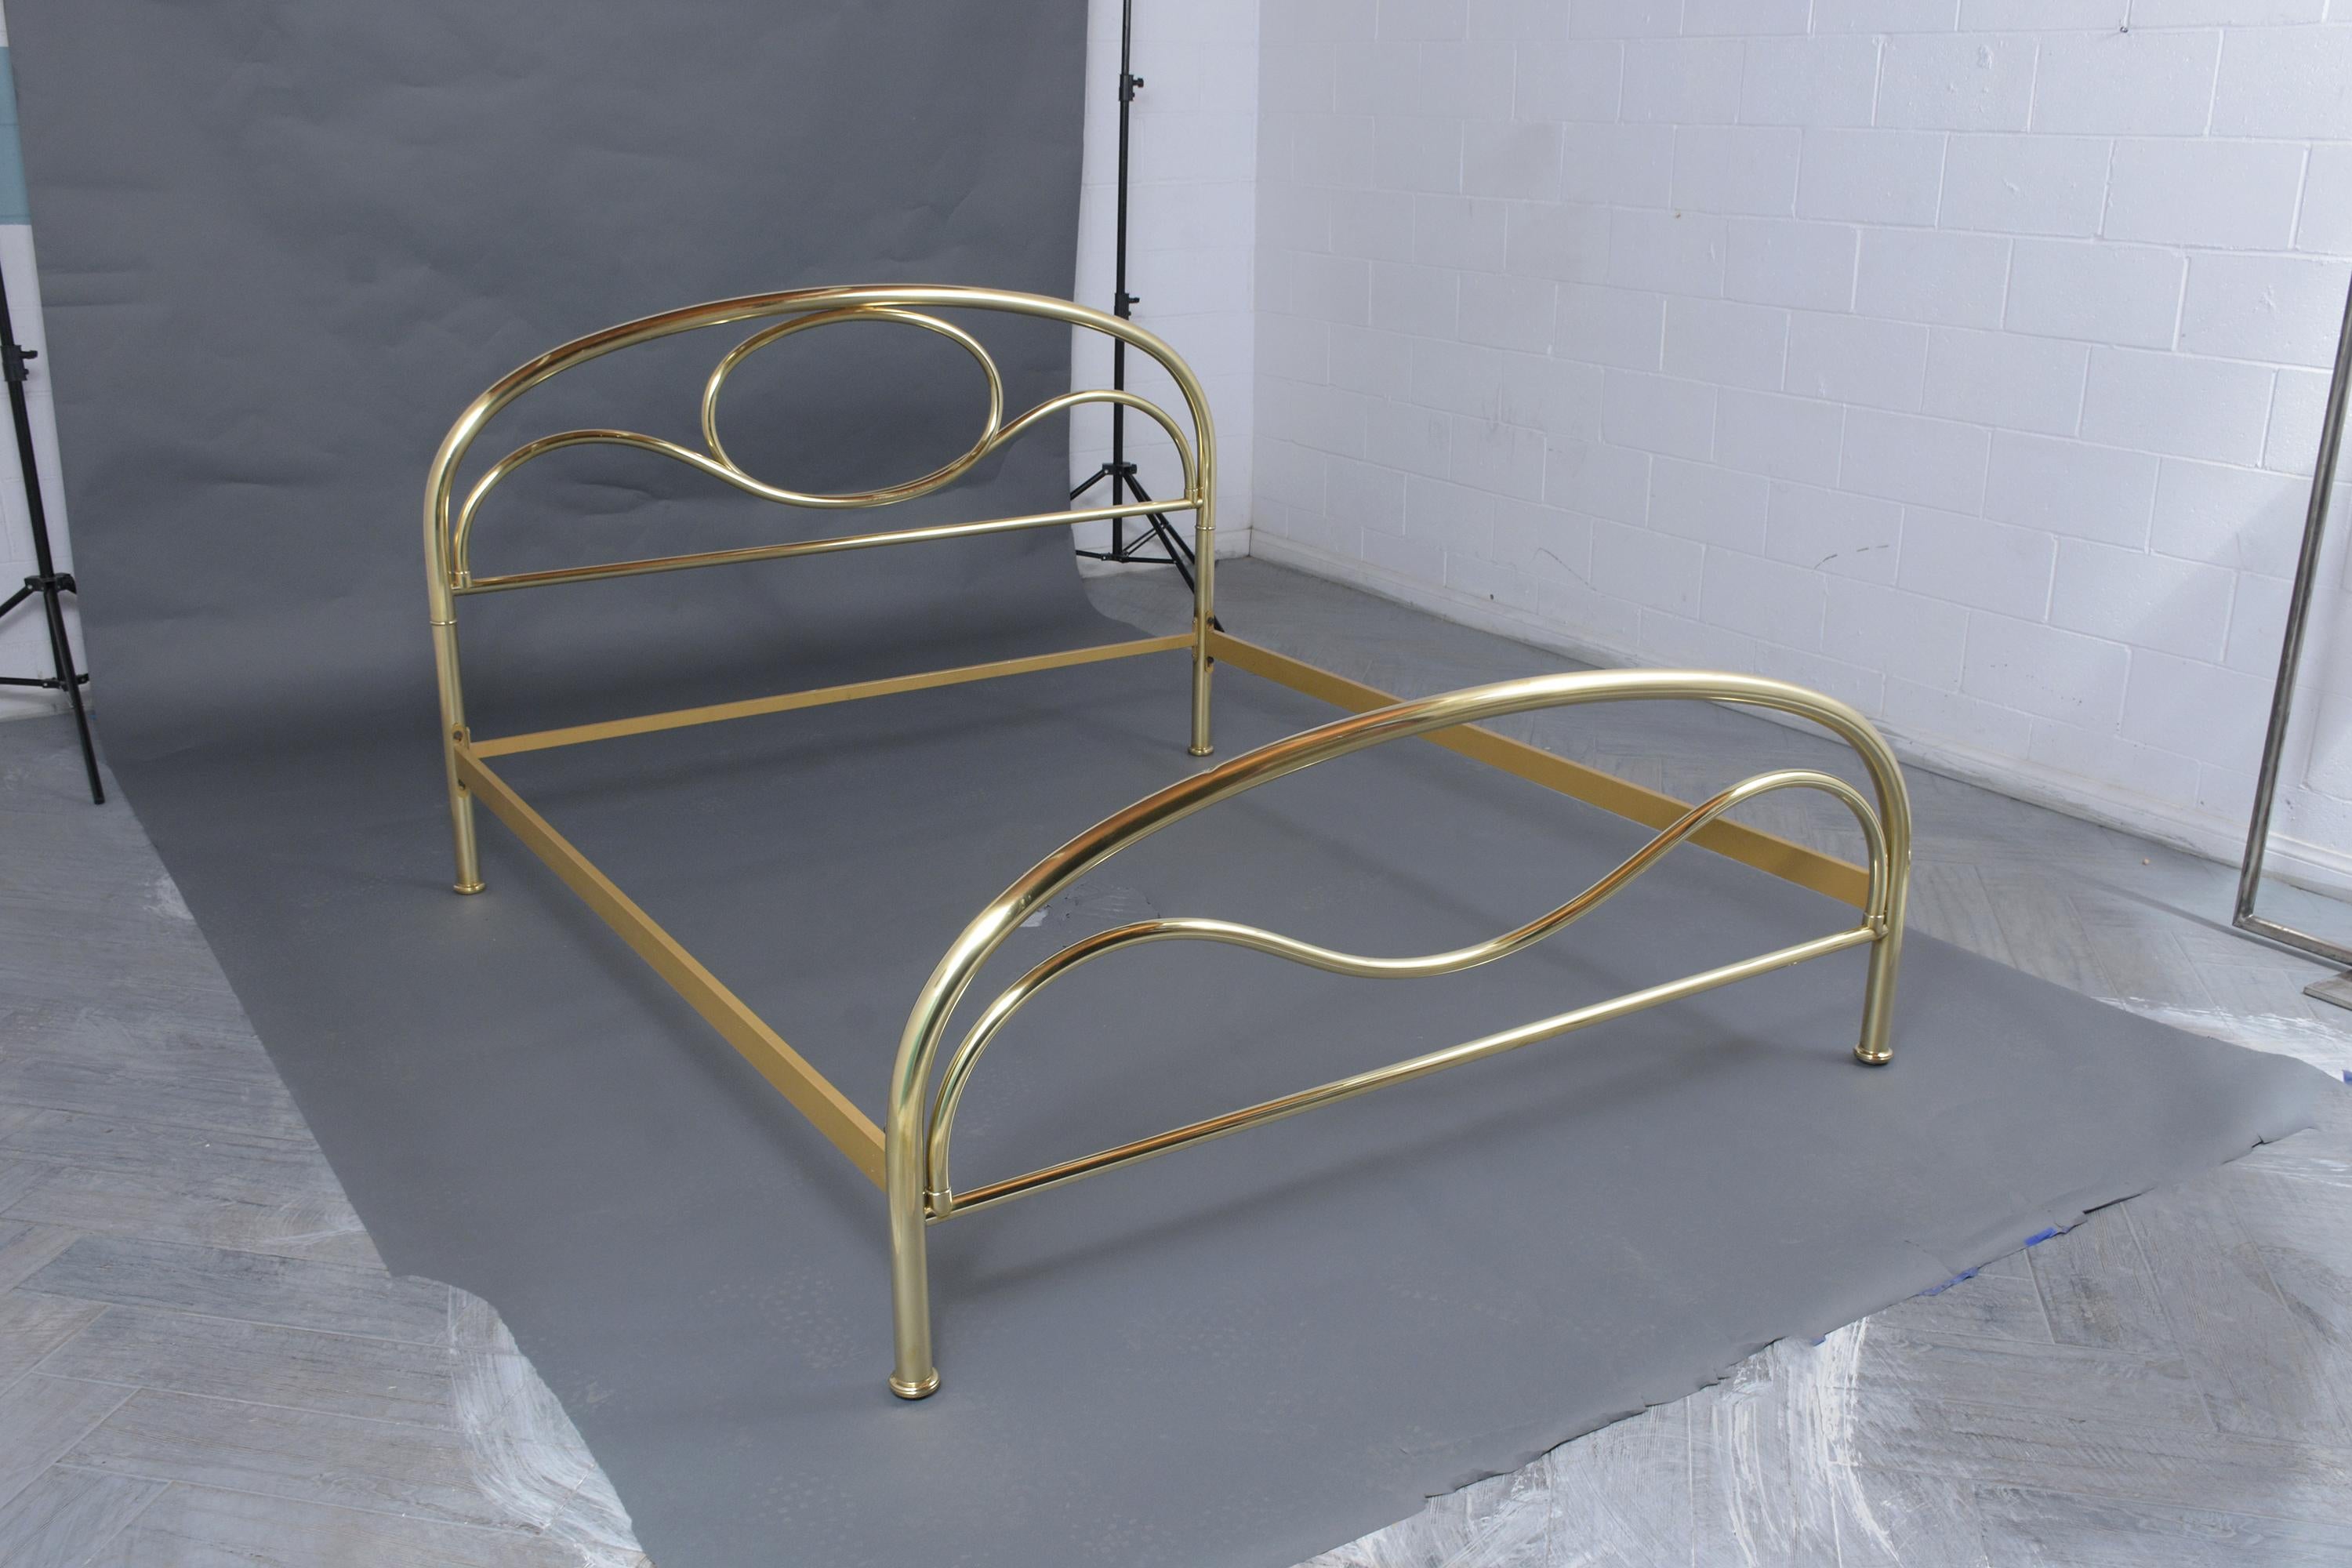 An extraordinary vintage queen-sized bed frame hand-crafted out of brass and is in good condition. This eye-catching bed frame features a fabulous art-deco design, is newly cleaned and polished, and is ready to be used in any bedroom for years to